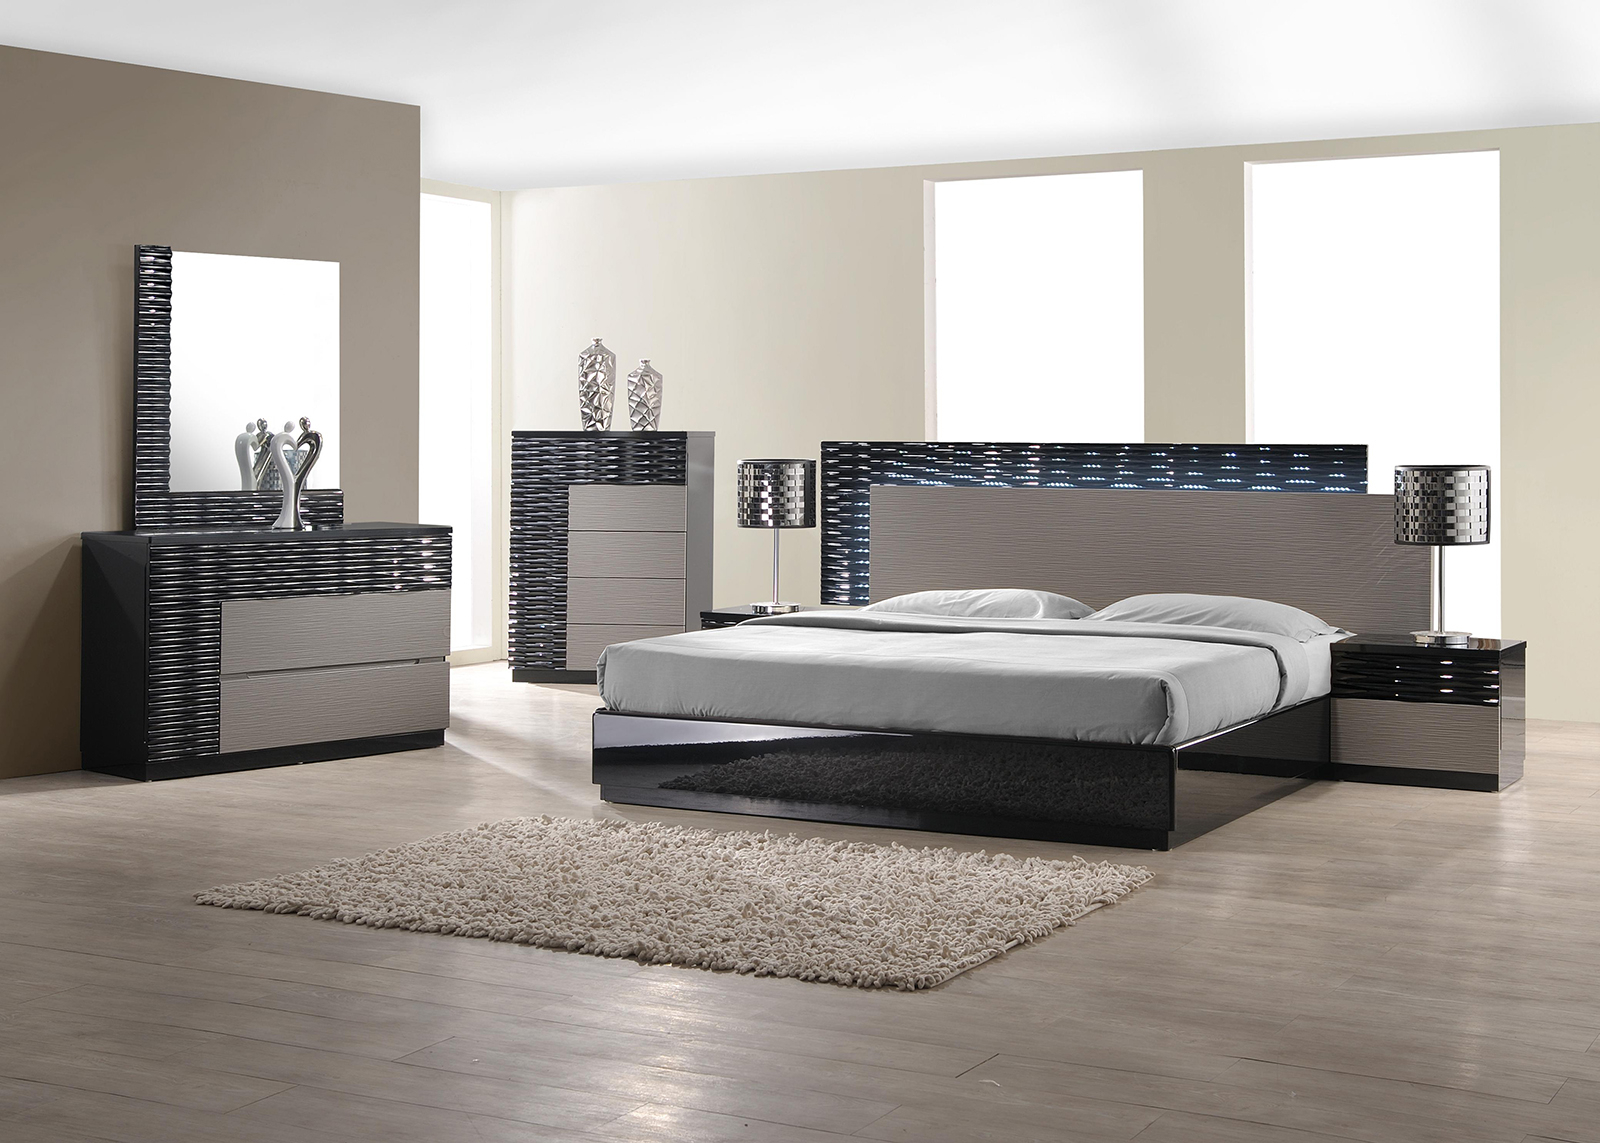 Jm Roma Platform Bedroom Set In Black And Grey Lacquer throughout measurements 1600 X 1143